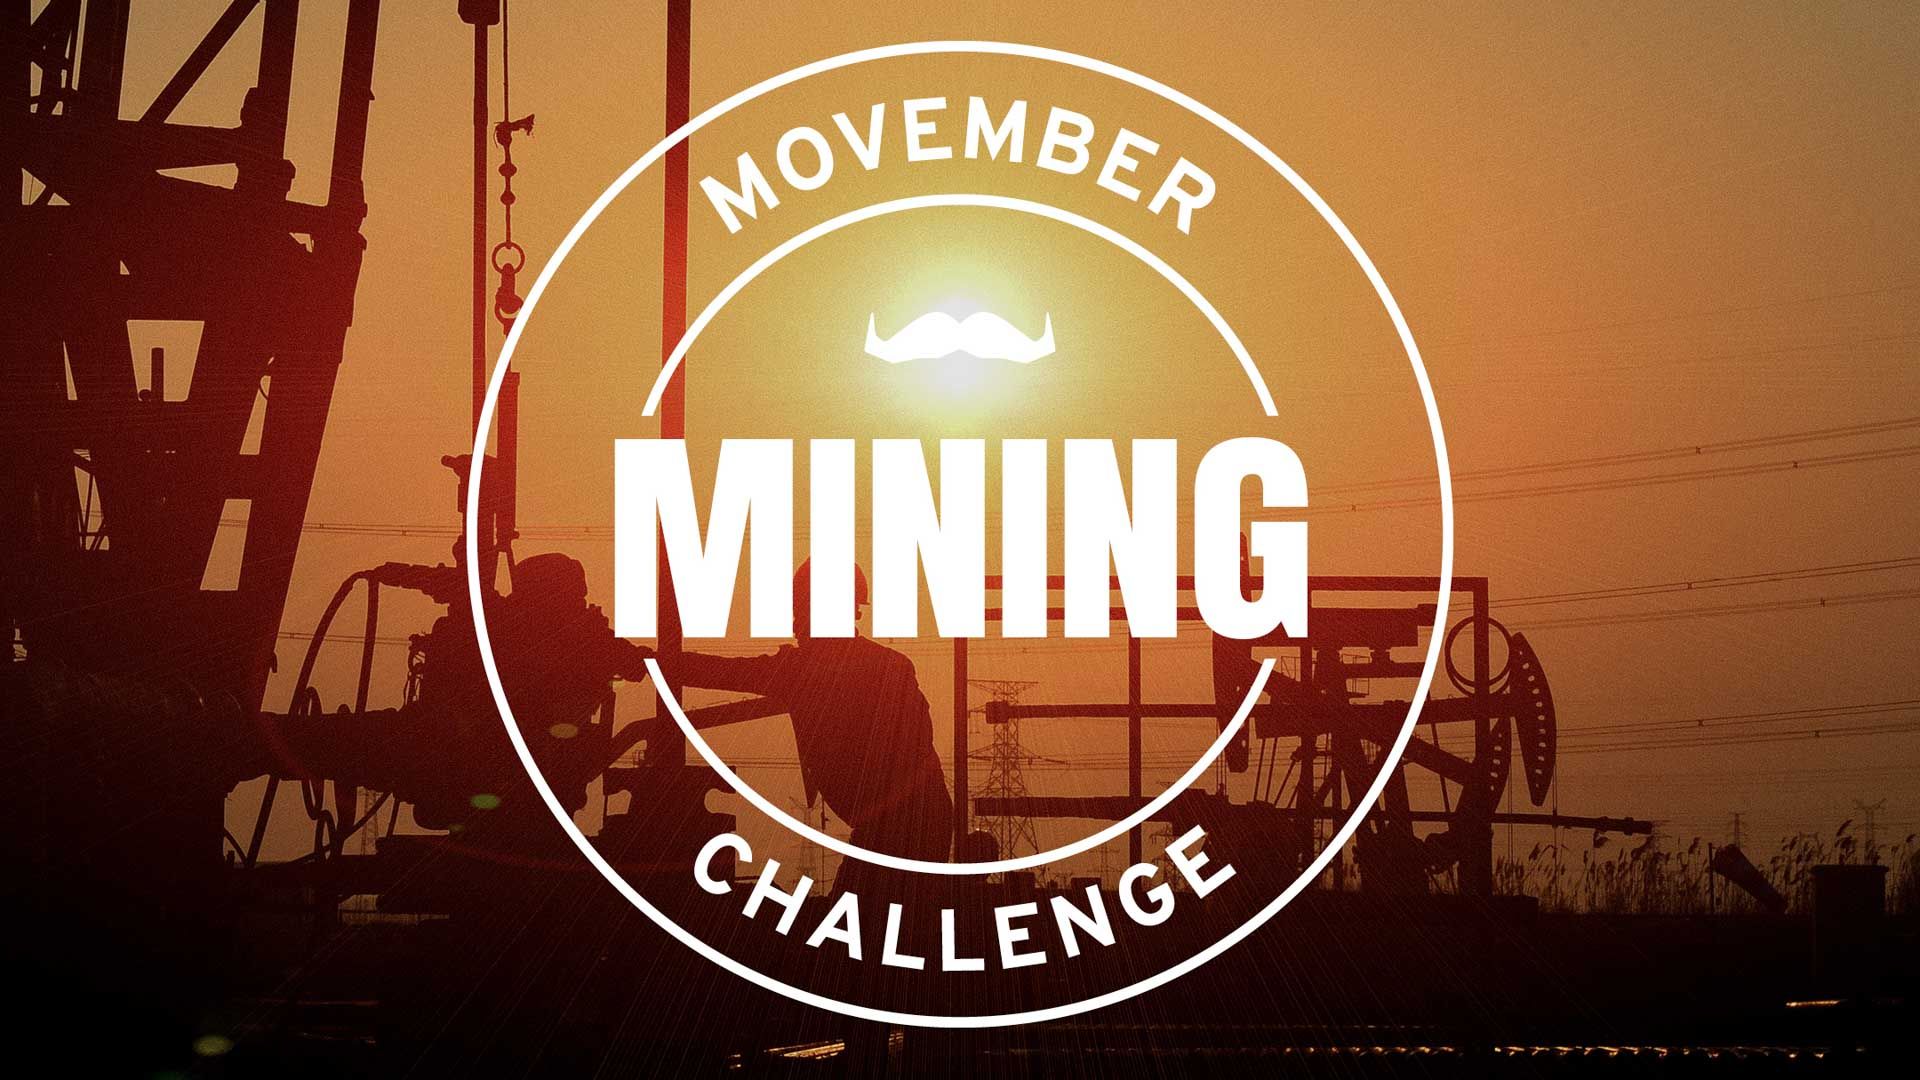 Mining Challenge logo set on the backdrop of of a mining scene with oil rigs and sunset 